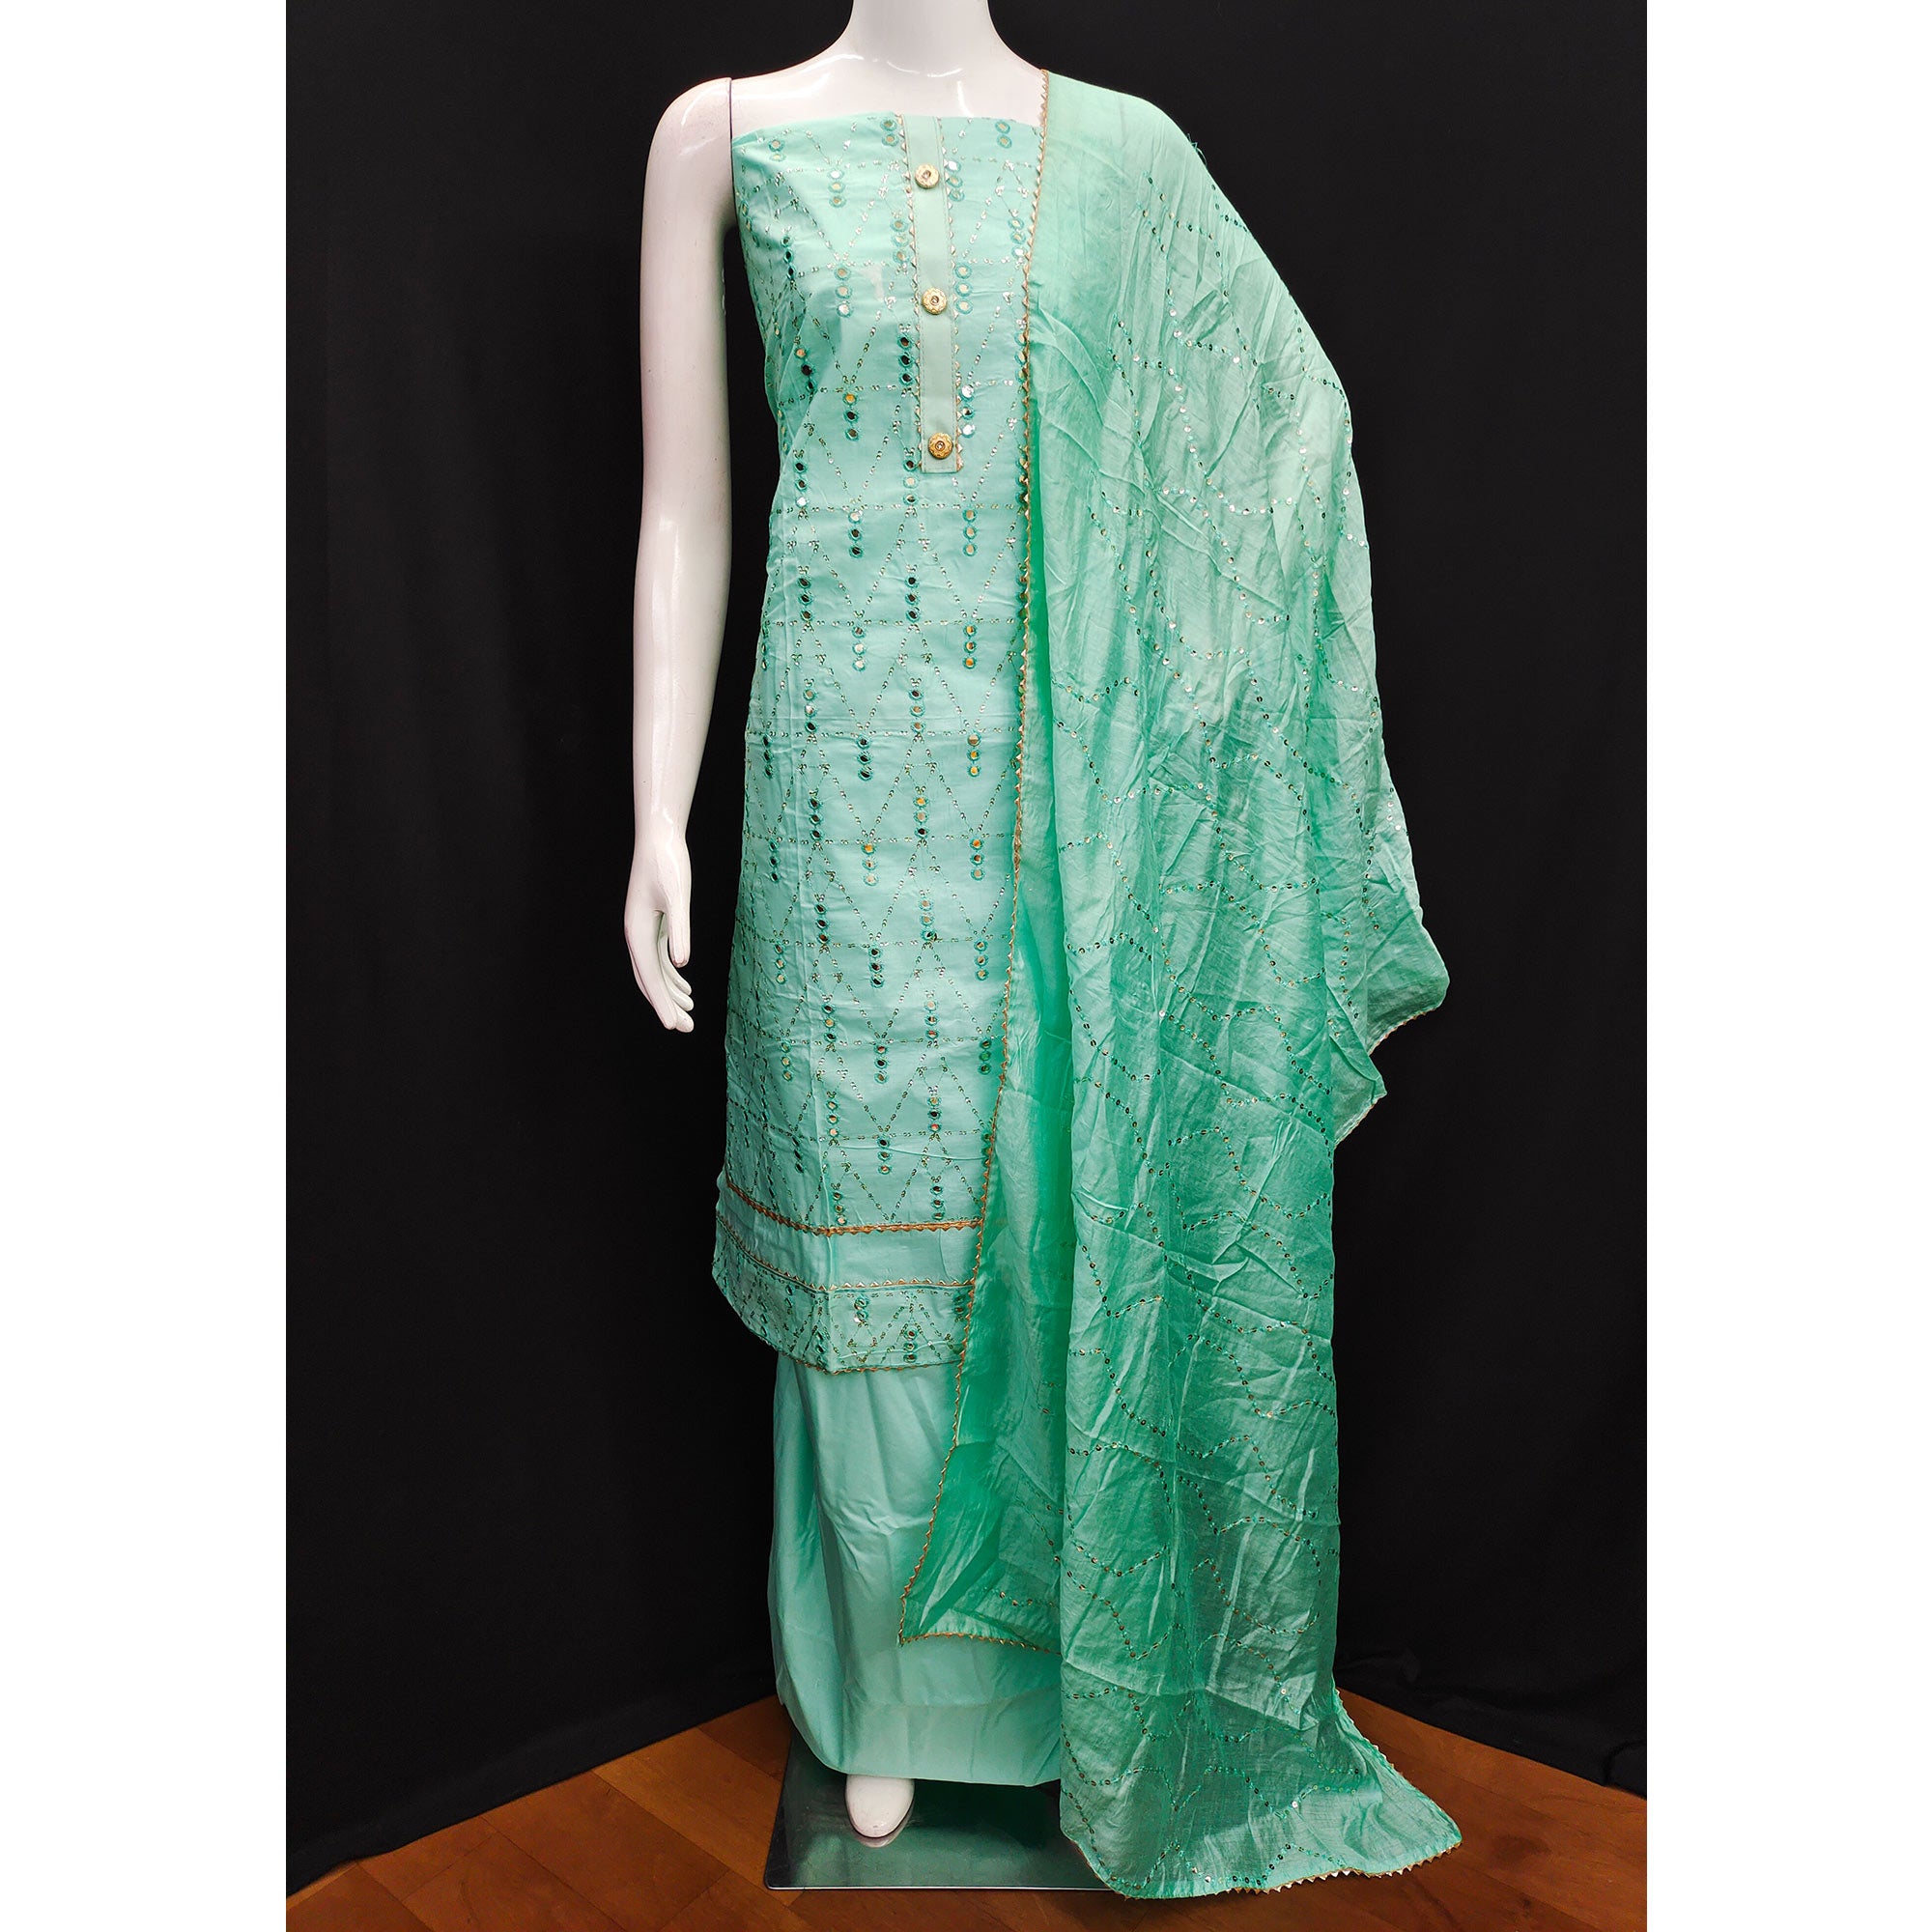 Turquoise Embroidered Cotton Blend Dress Material